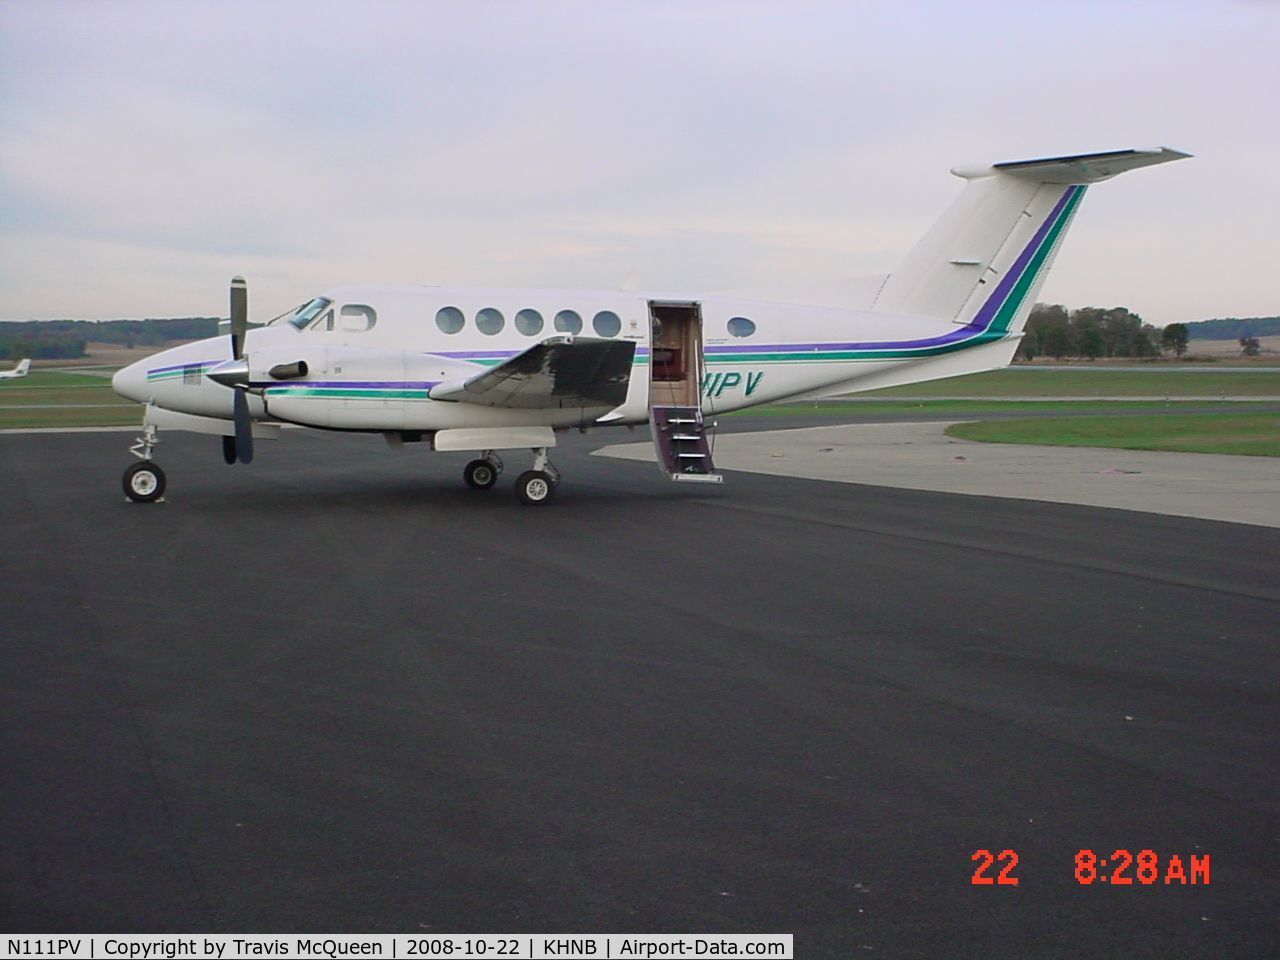 N111PV, 1981 Beech 200 C/N BB-772, Parked on ramp in front of Terminal...